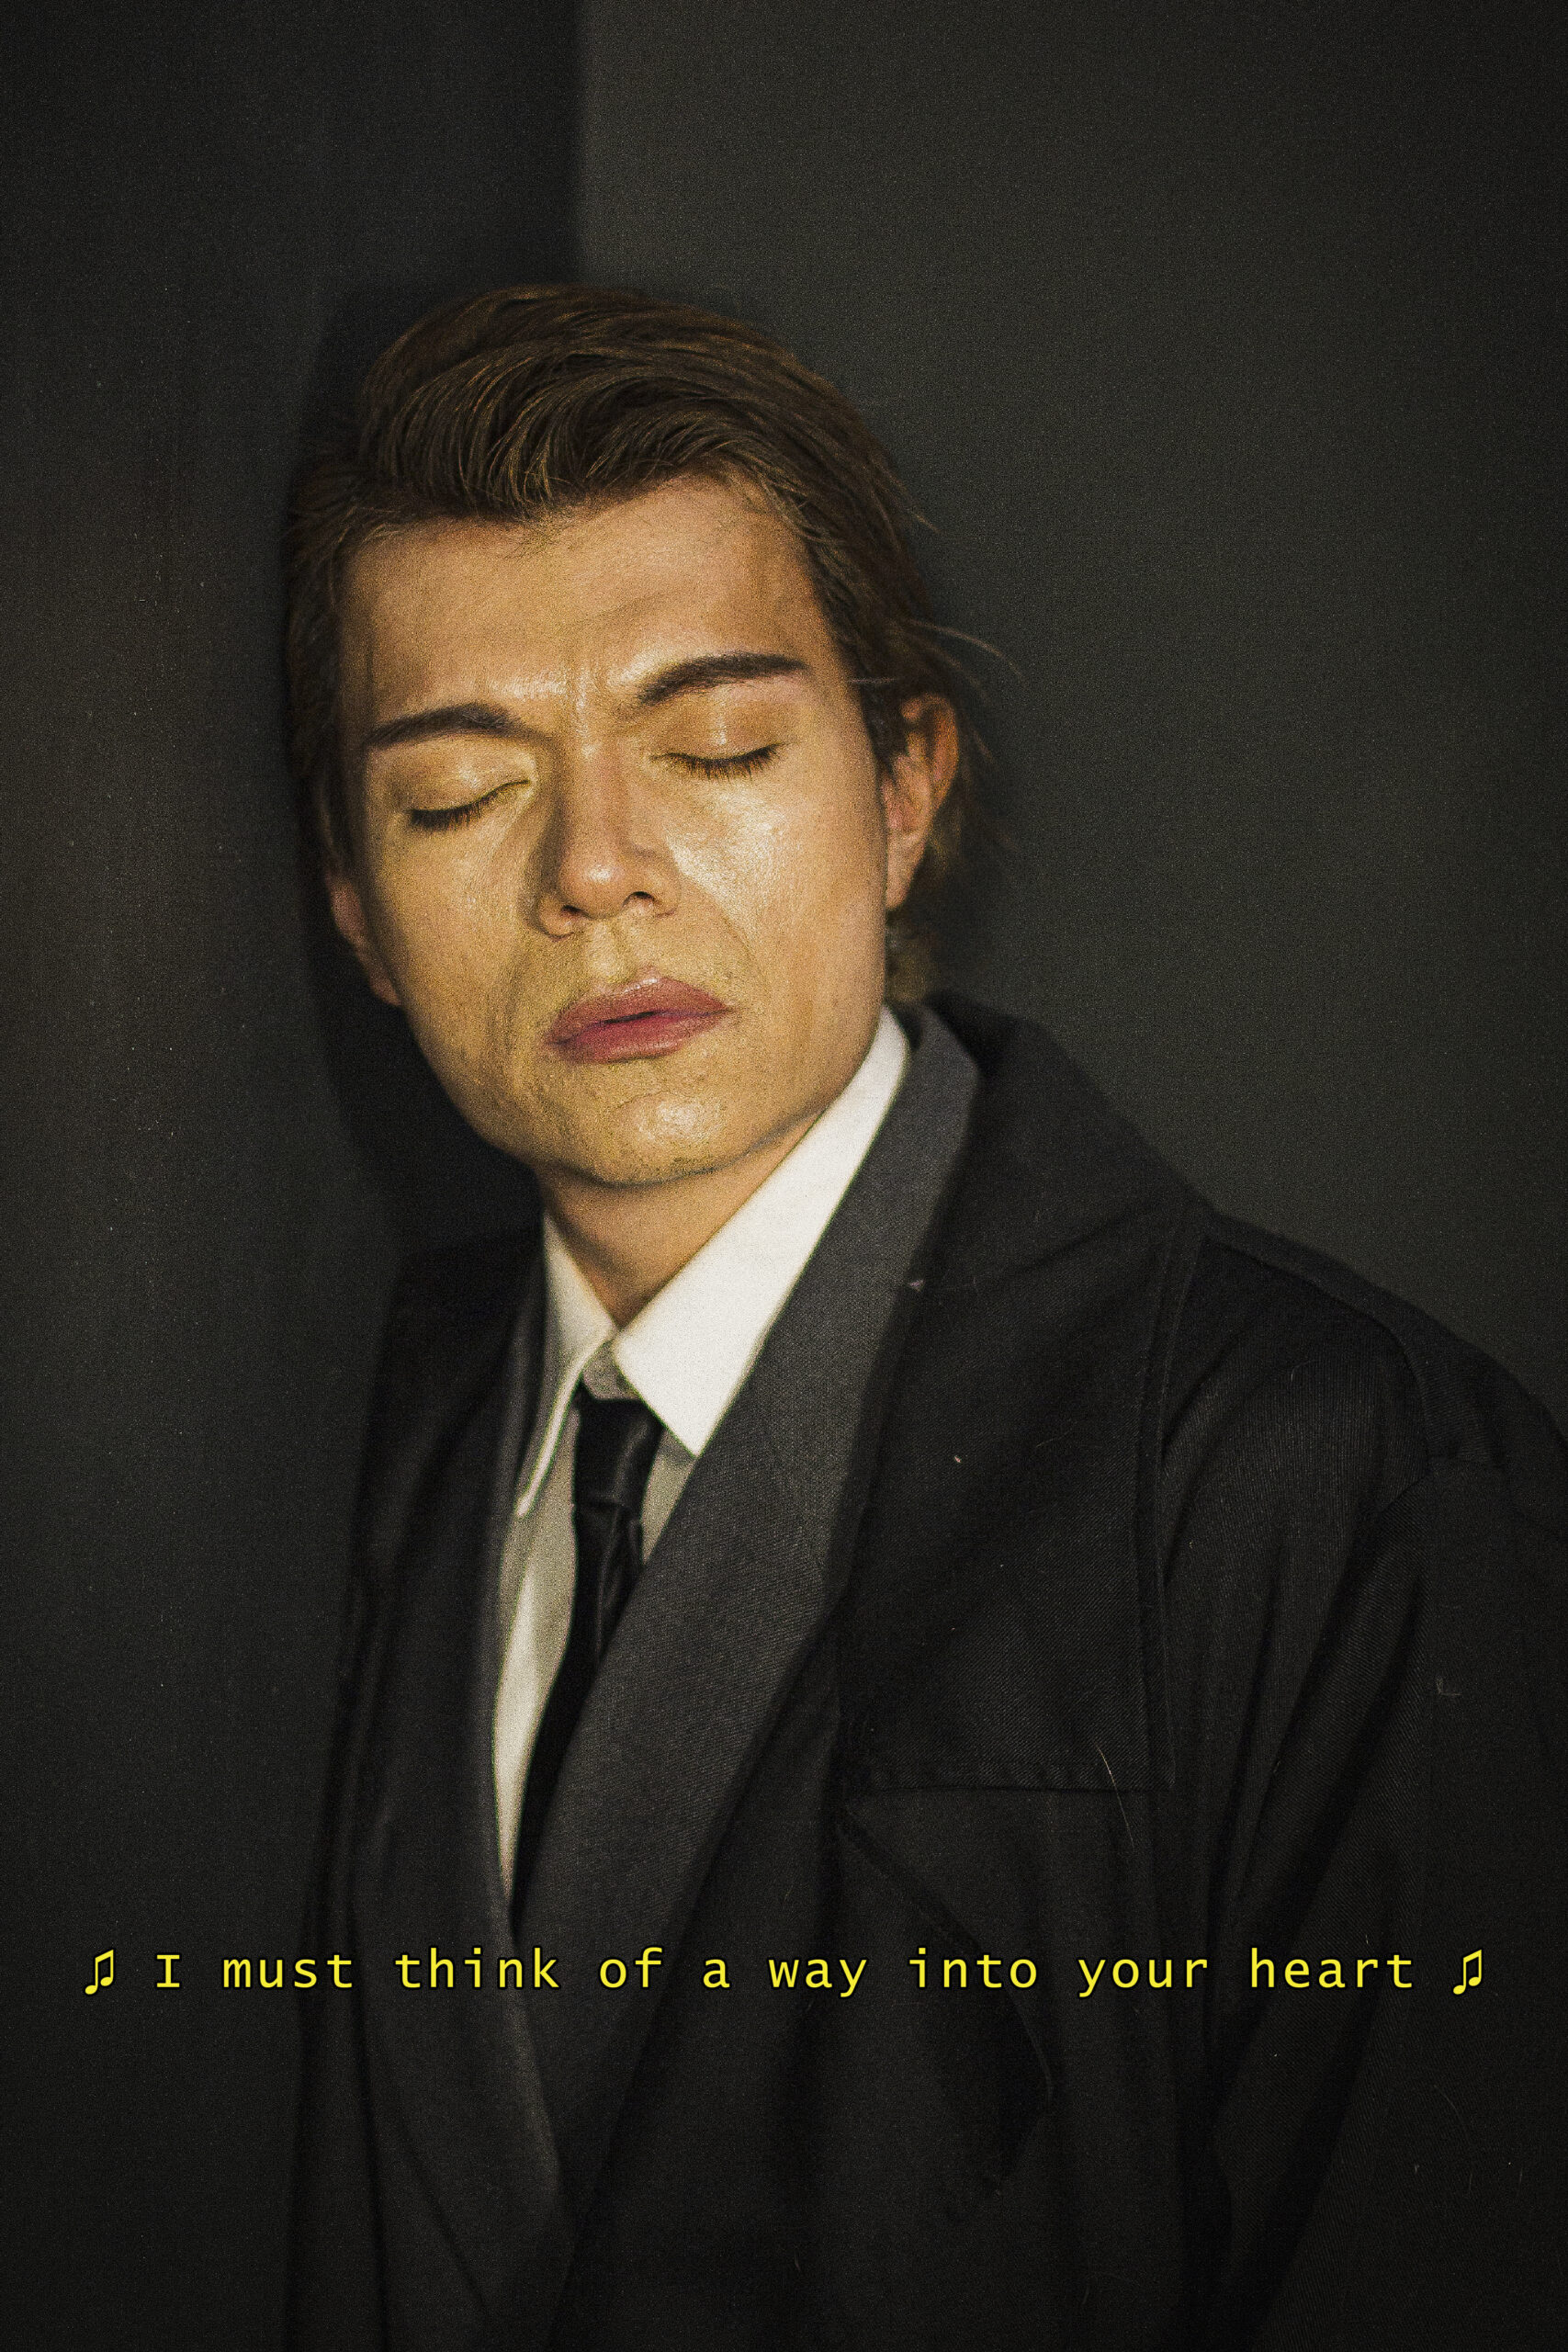 Jaime wears a white shirt, black tie, grey blazer, and black overcoat. He leans against a wall with his eyes closed. At the bottom of the image text bracketed by music notes reads "I must think of a way into your heart"